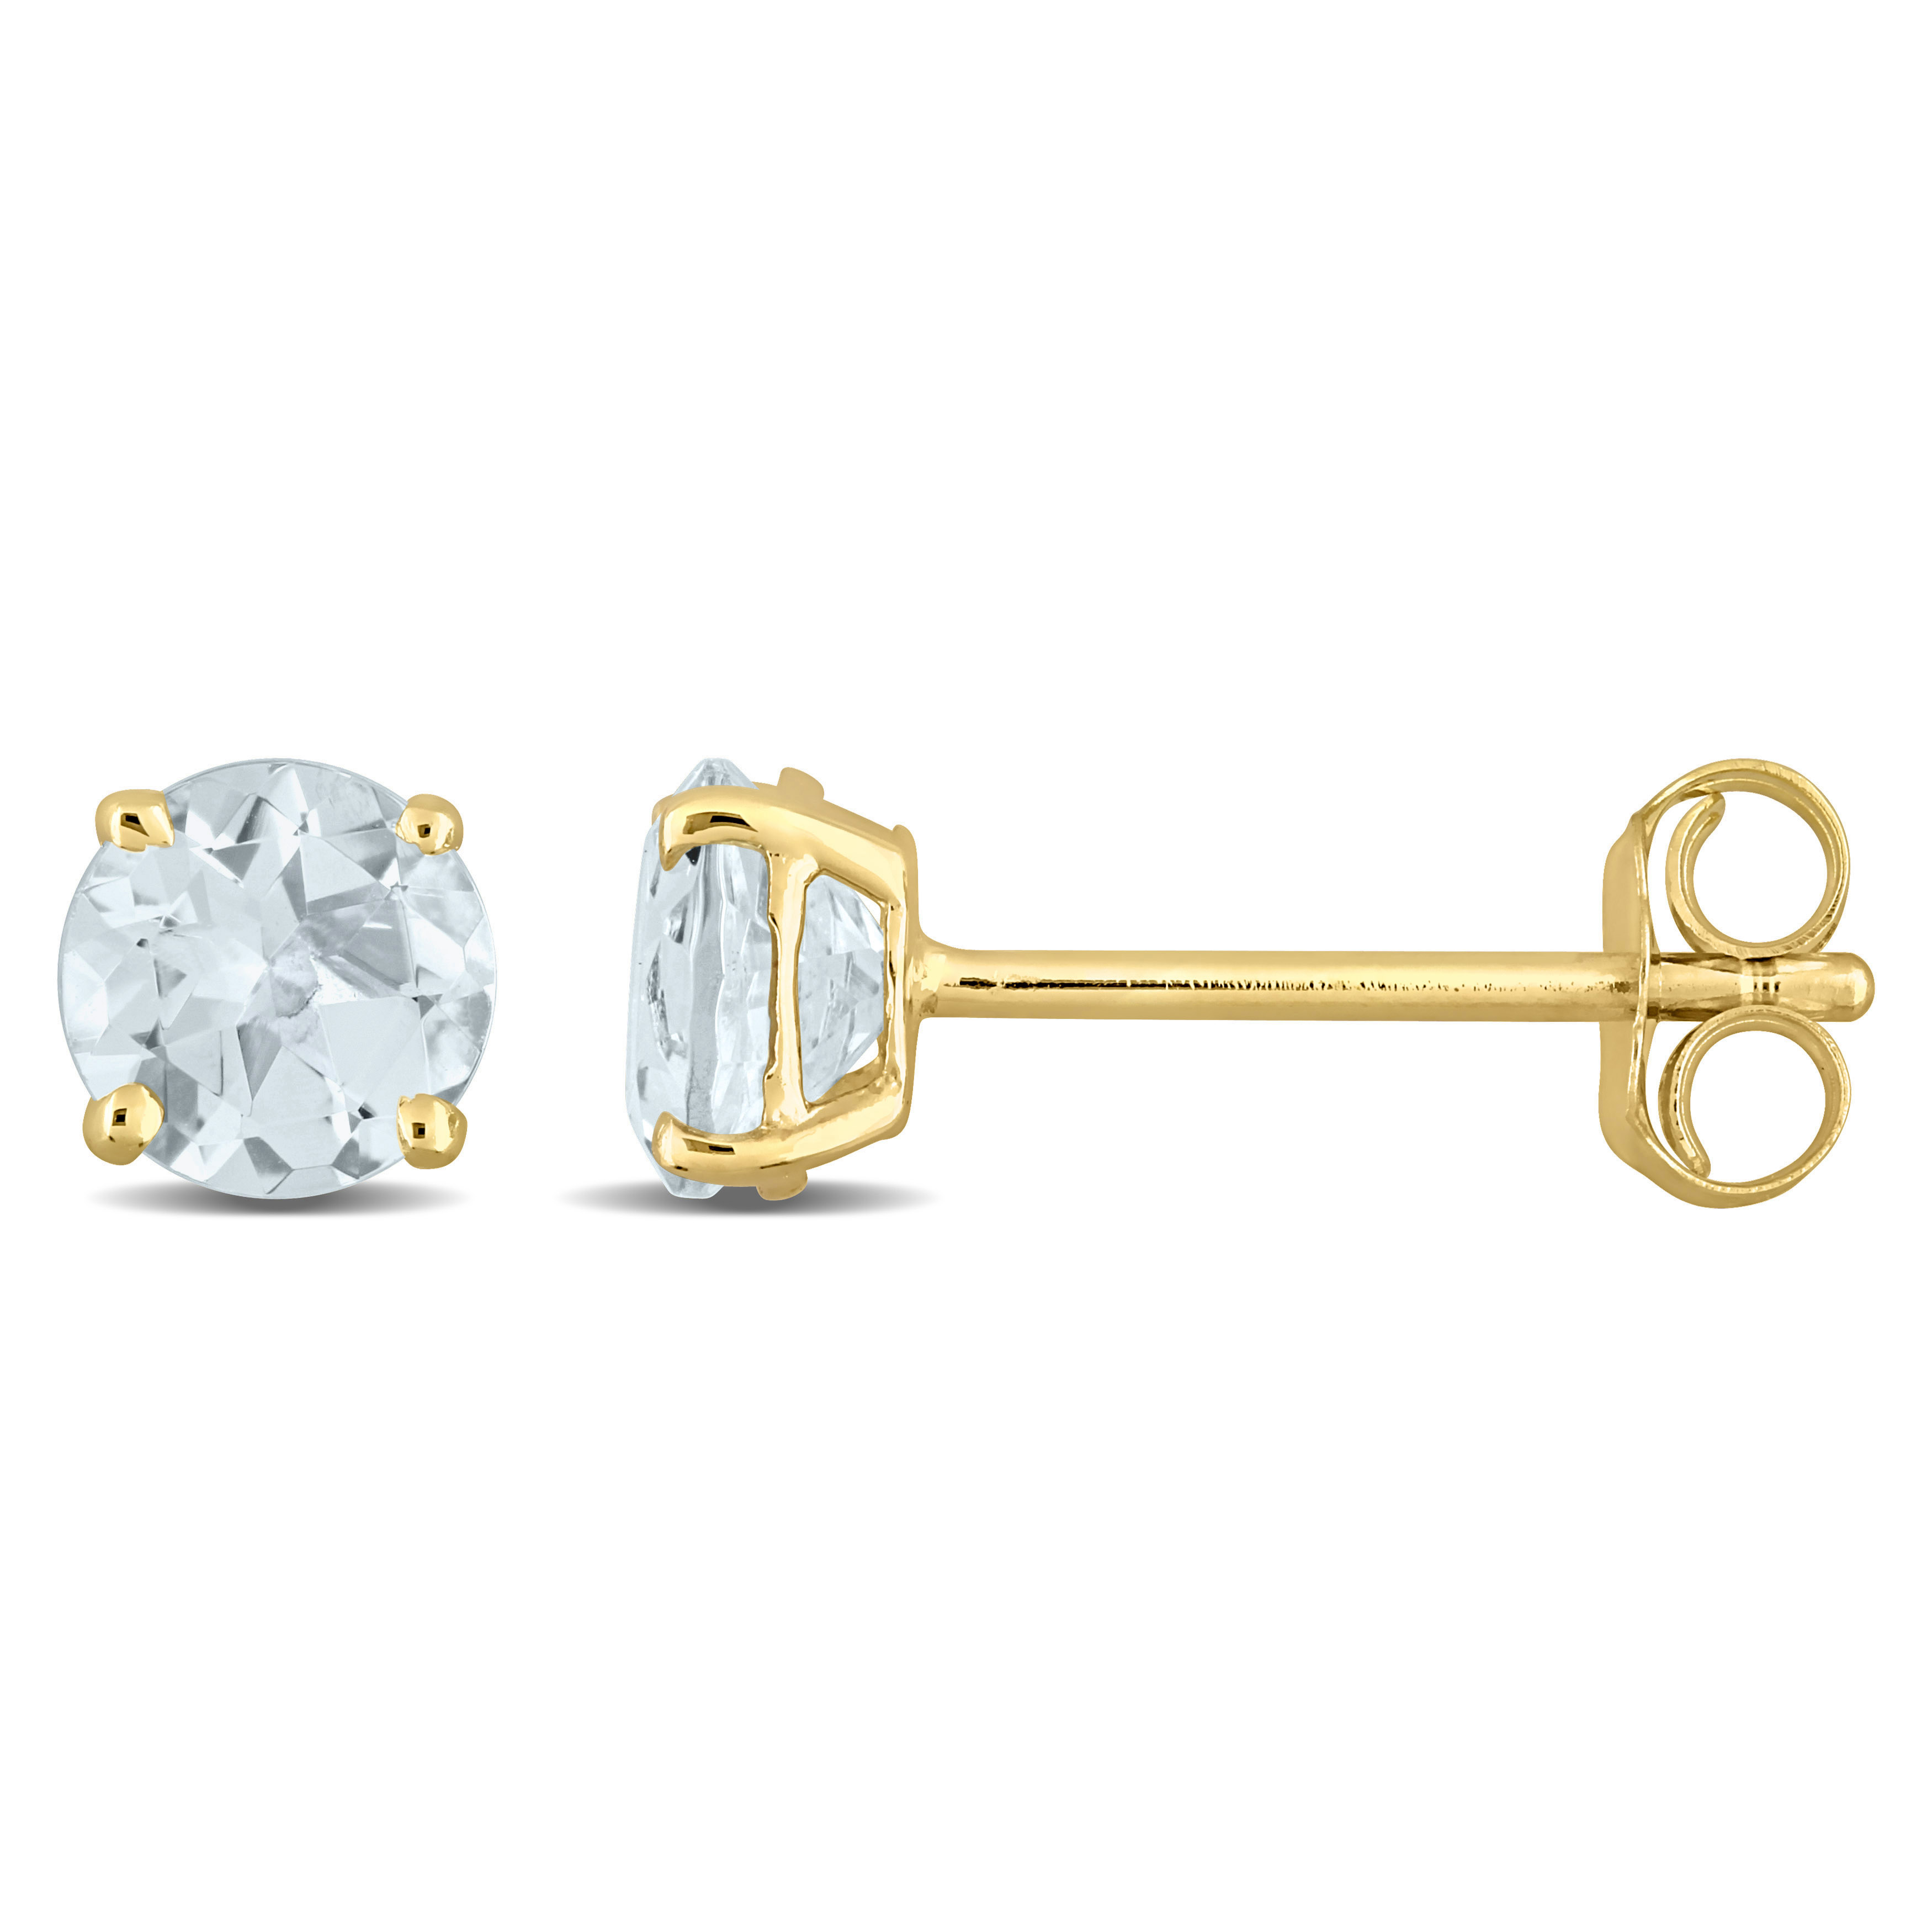 4/5 CT TGW Aquamarine Solitaire Stud Earrings in 14k Yellow Gold